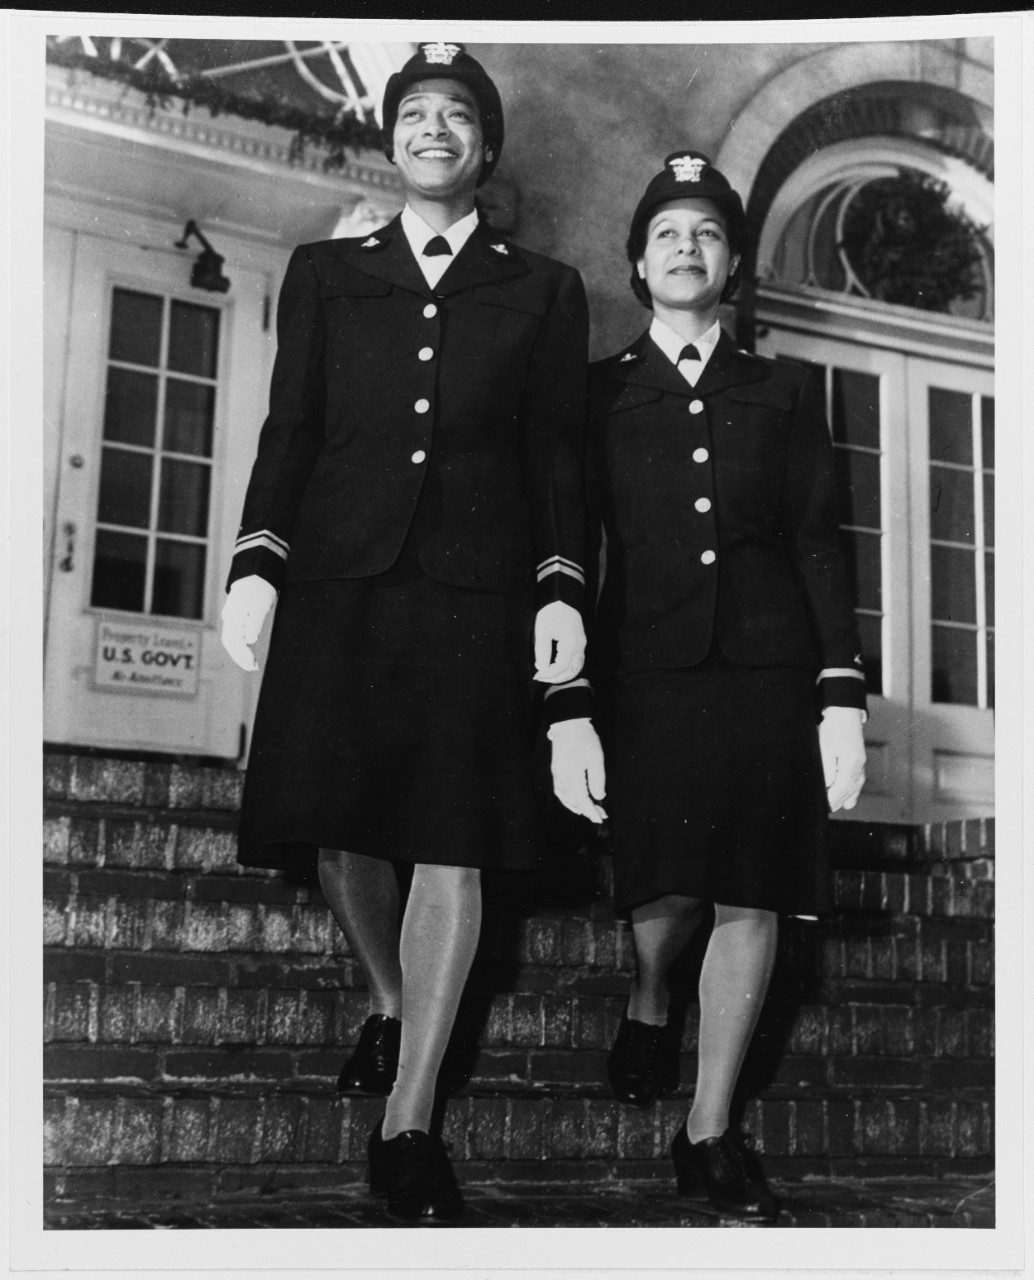 Lieutenant (Junior Grade) Harriet Ida Pickens (left) and Ensign Frances Wills photographed after graduation from the Naval Reserve Midshipmen's School (WR) at Northampton, Massachusetts, in December 1944. They were members of the school's final class, and were the Navy's first African-American WAVES officers. Official U.S. Navy Photograph, now in the collections of the National Archives.